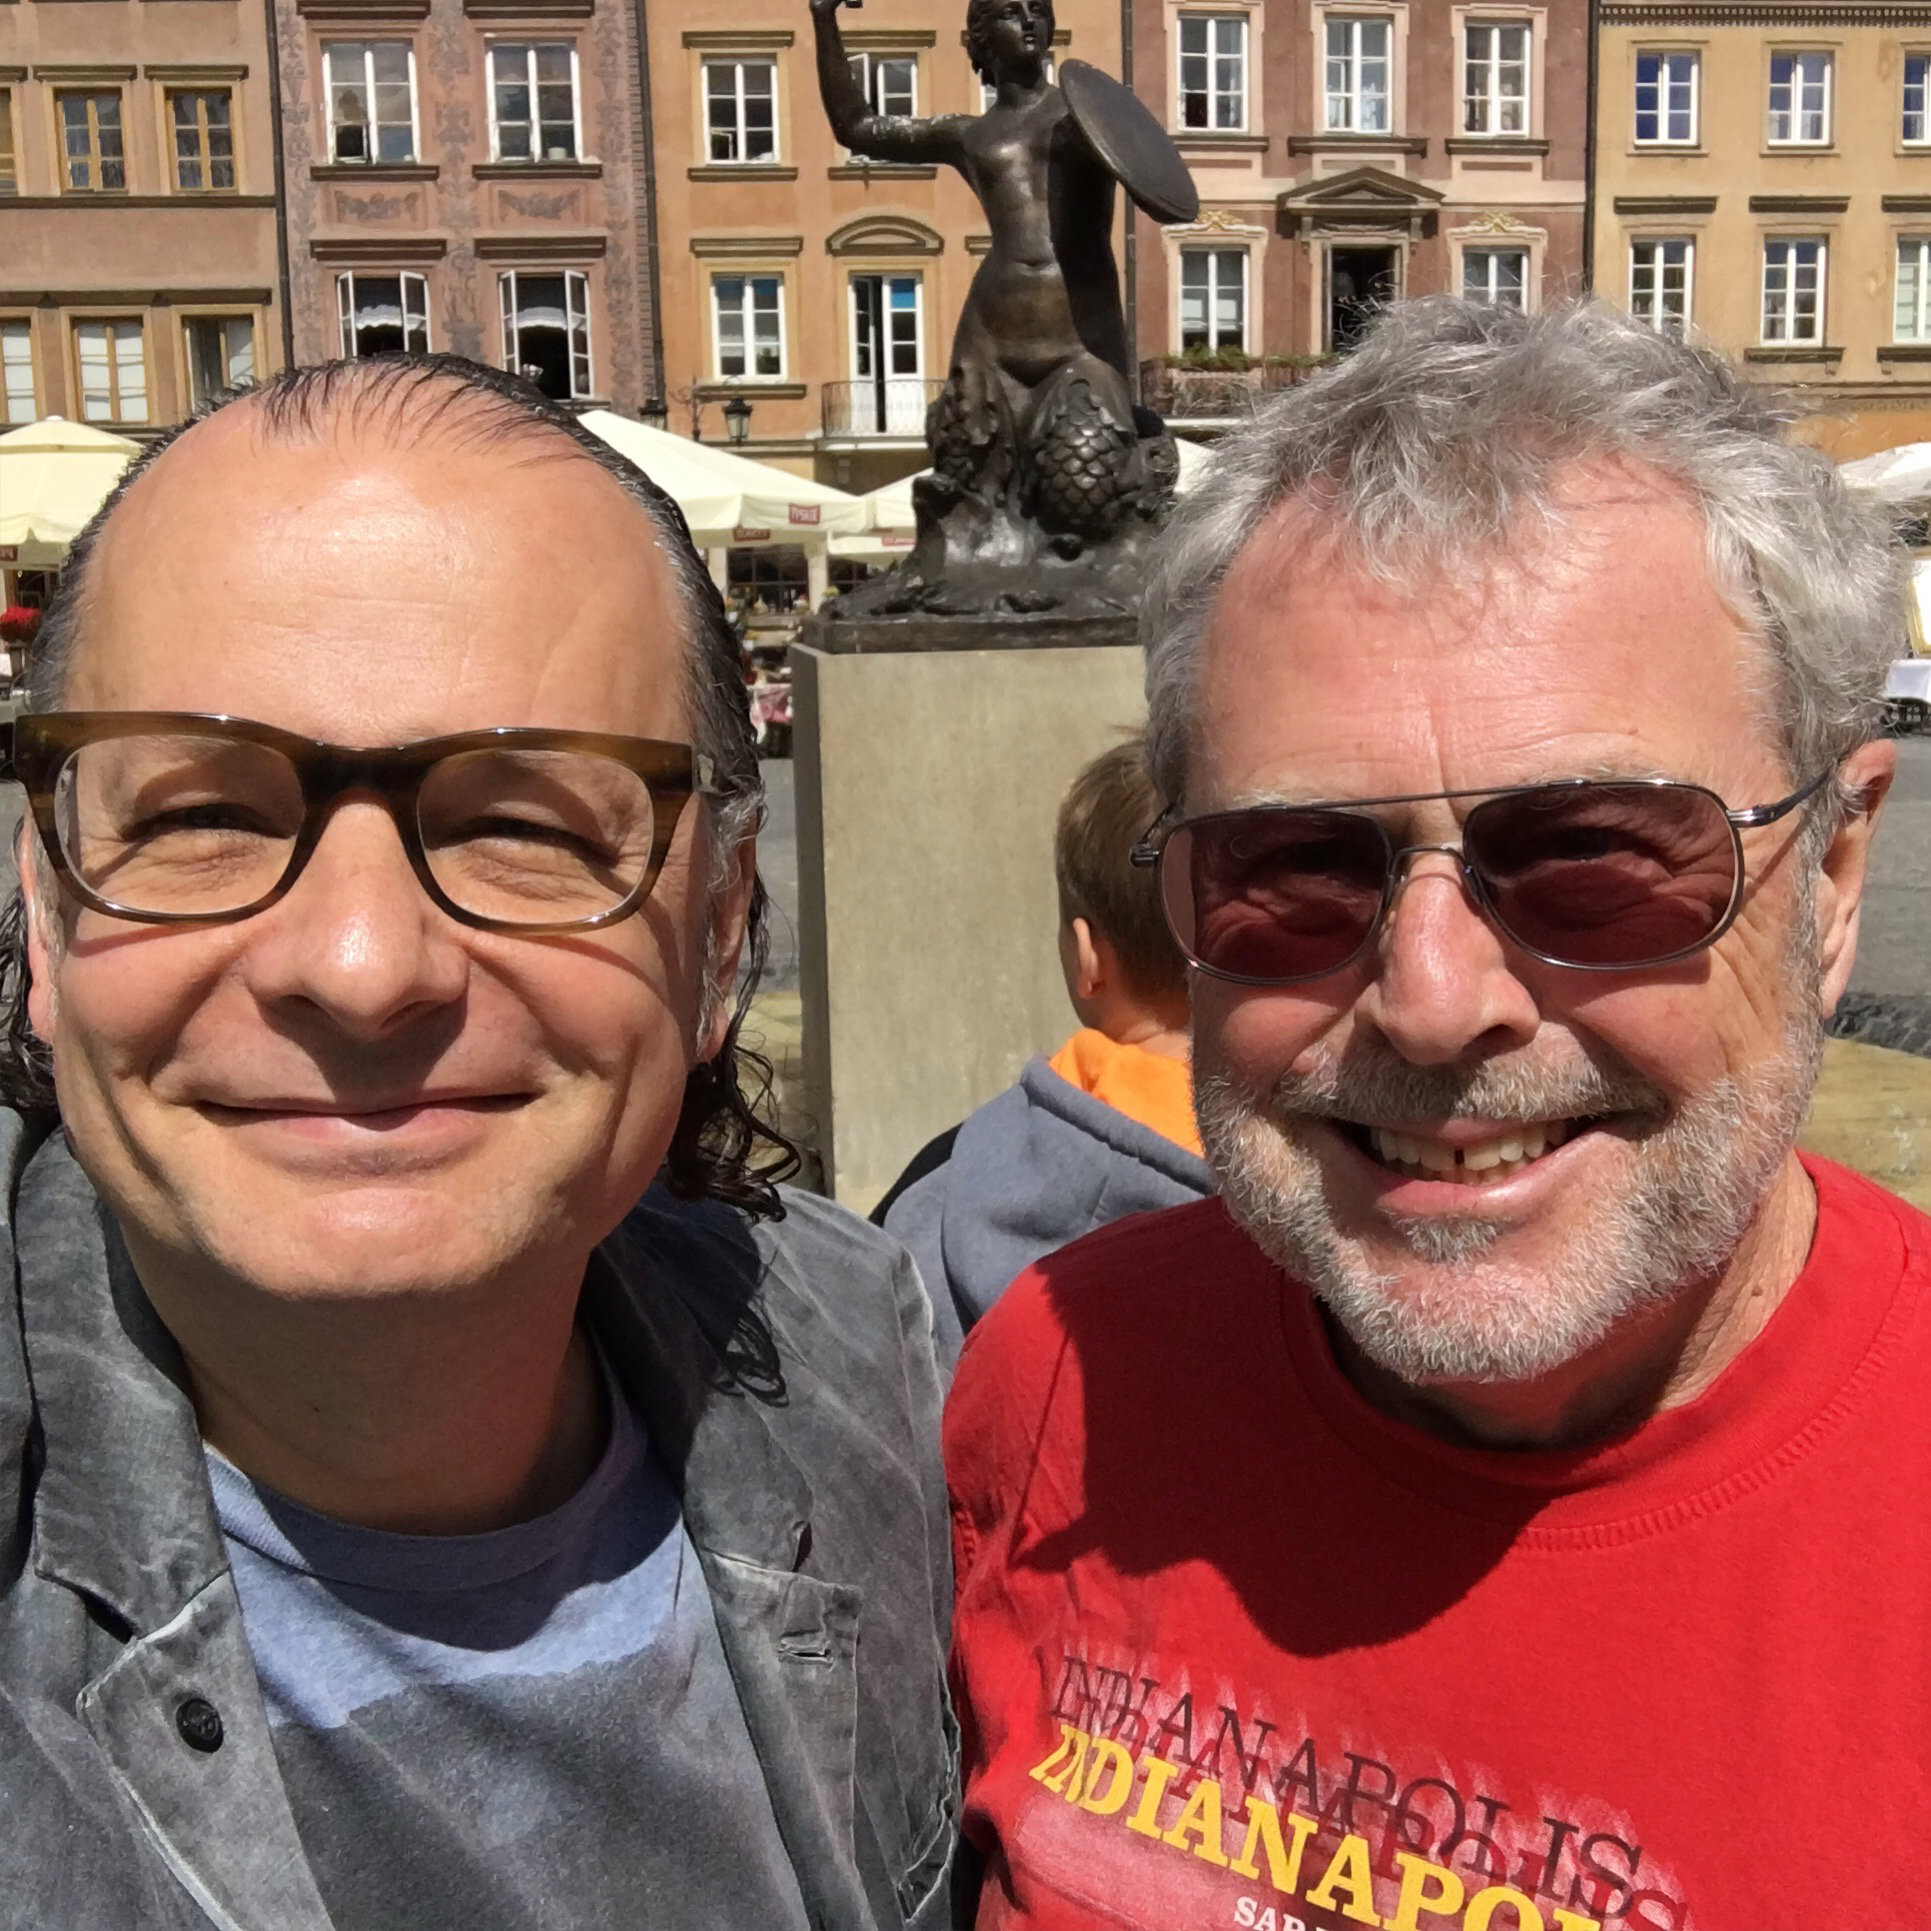 Brussels with David Hood